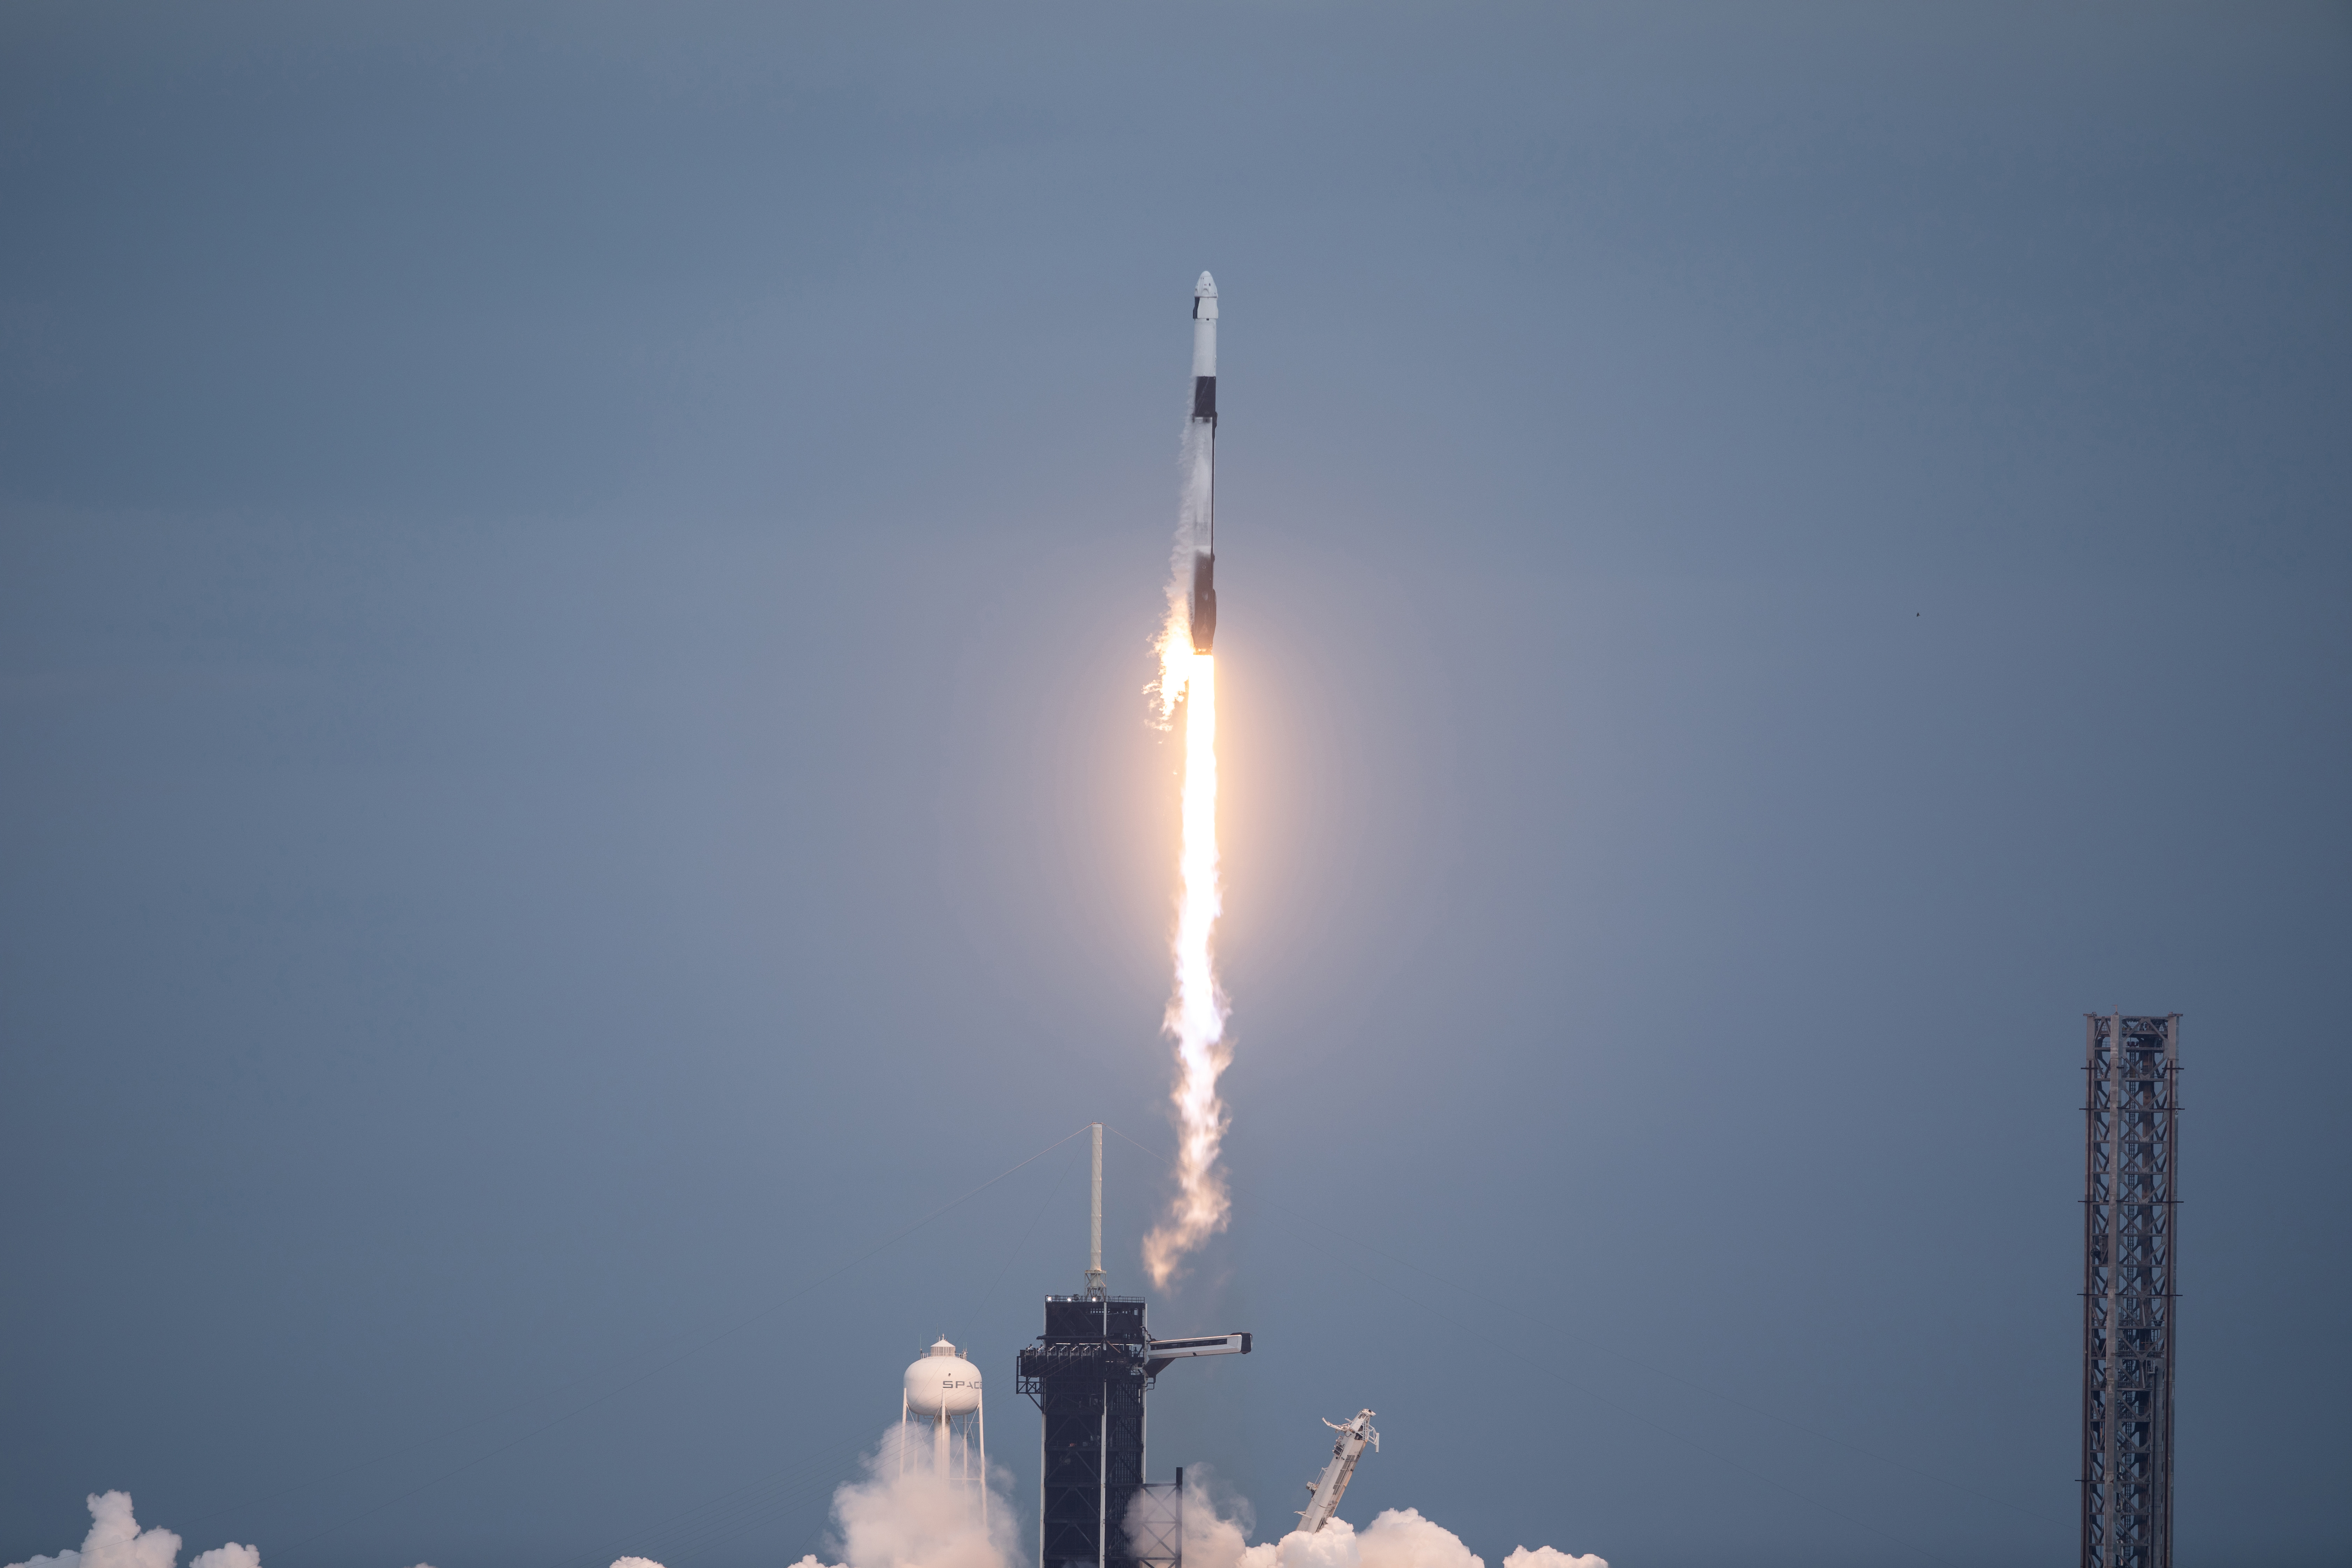 A black and white SpaceX Falcon 9 rocket launches upward through the sky, a bright white-yellow plume trailing behind it.